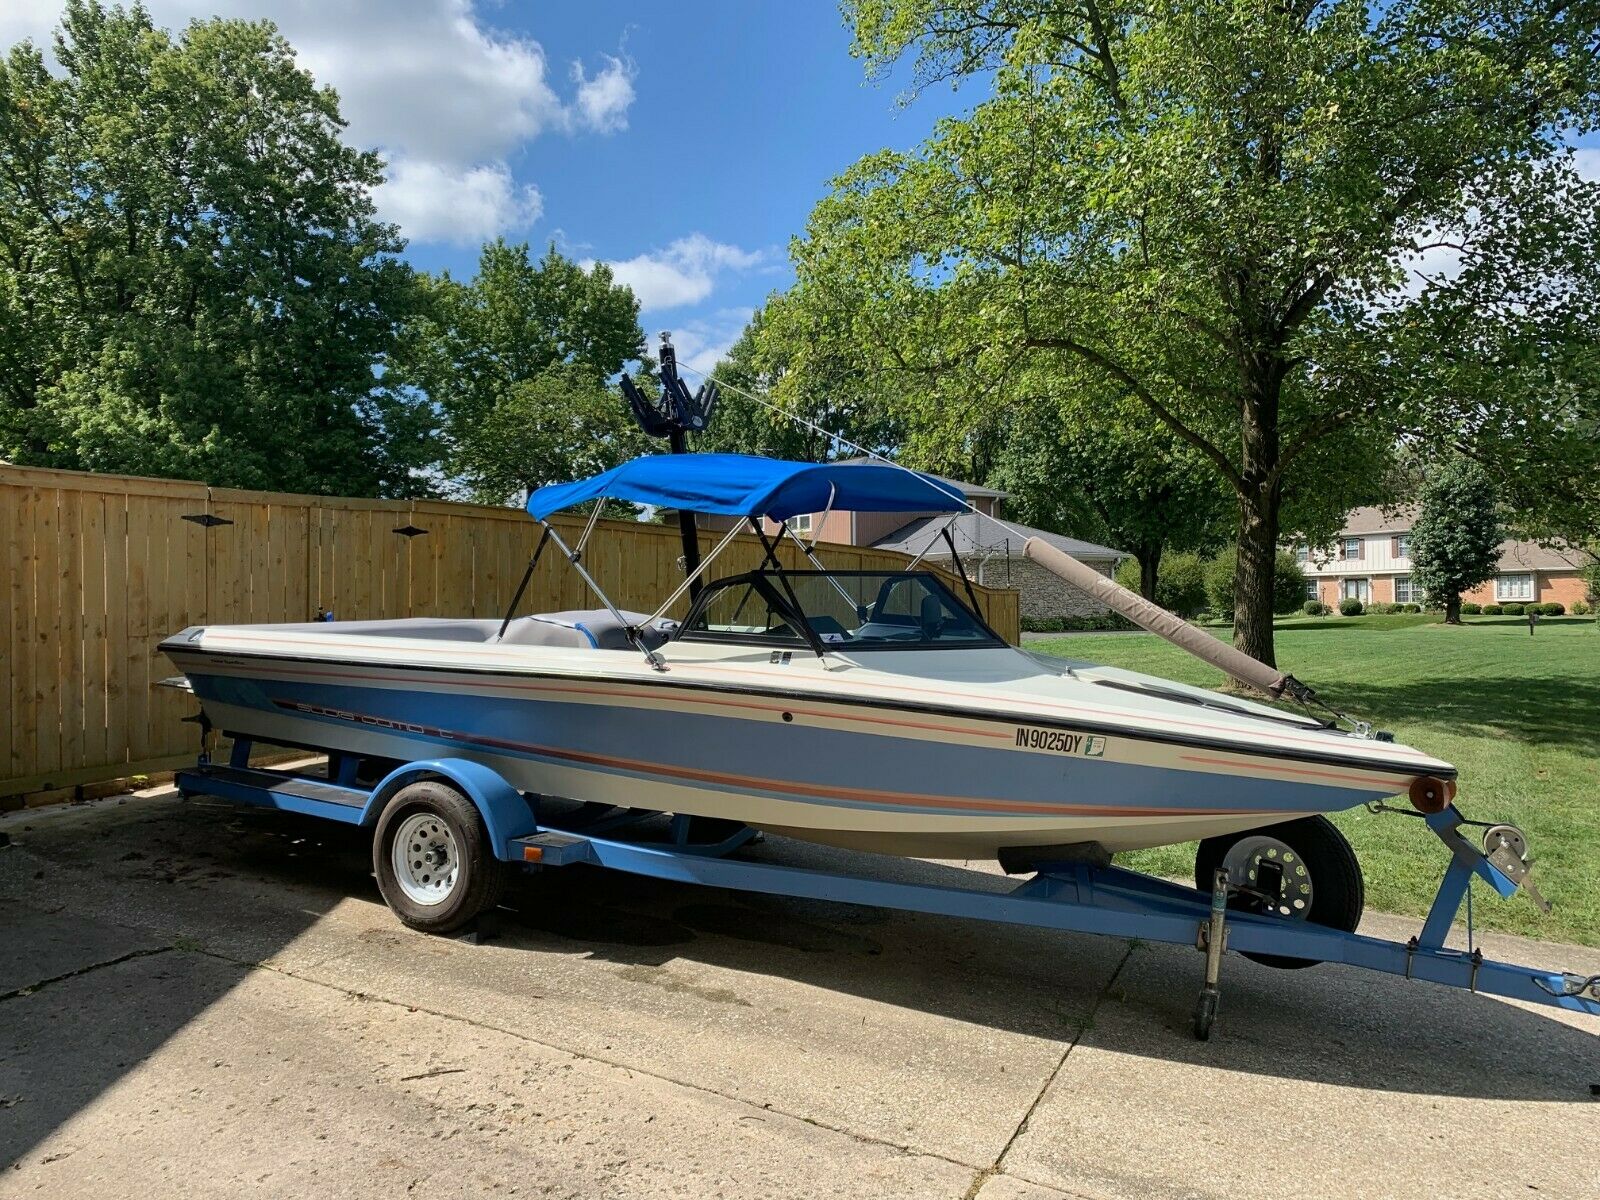 Supra Comp Ts6m 1990 for sale for $6,499 - Boats-from-USA.com